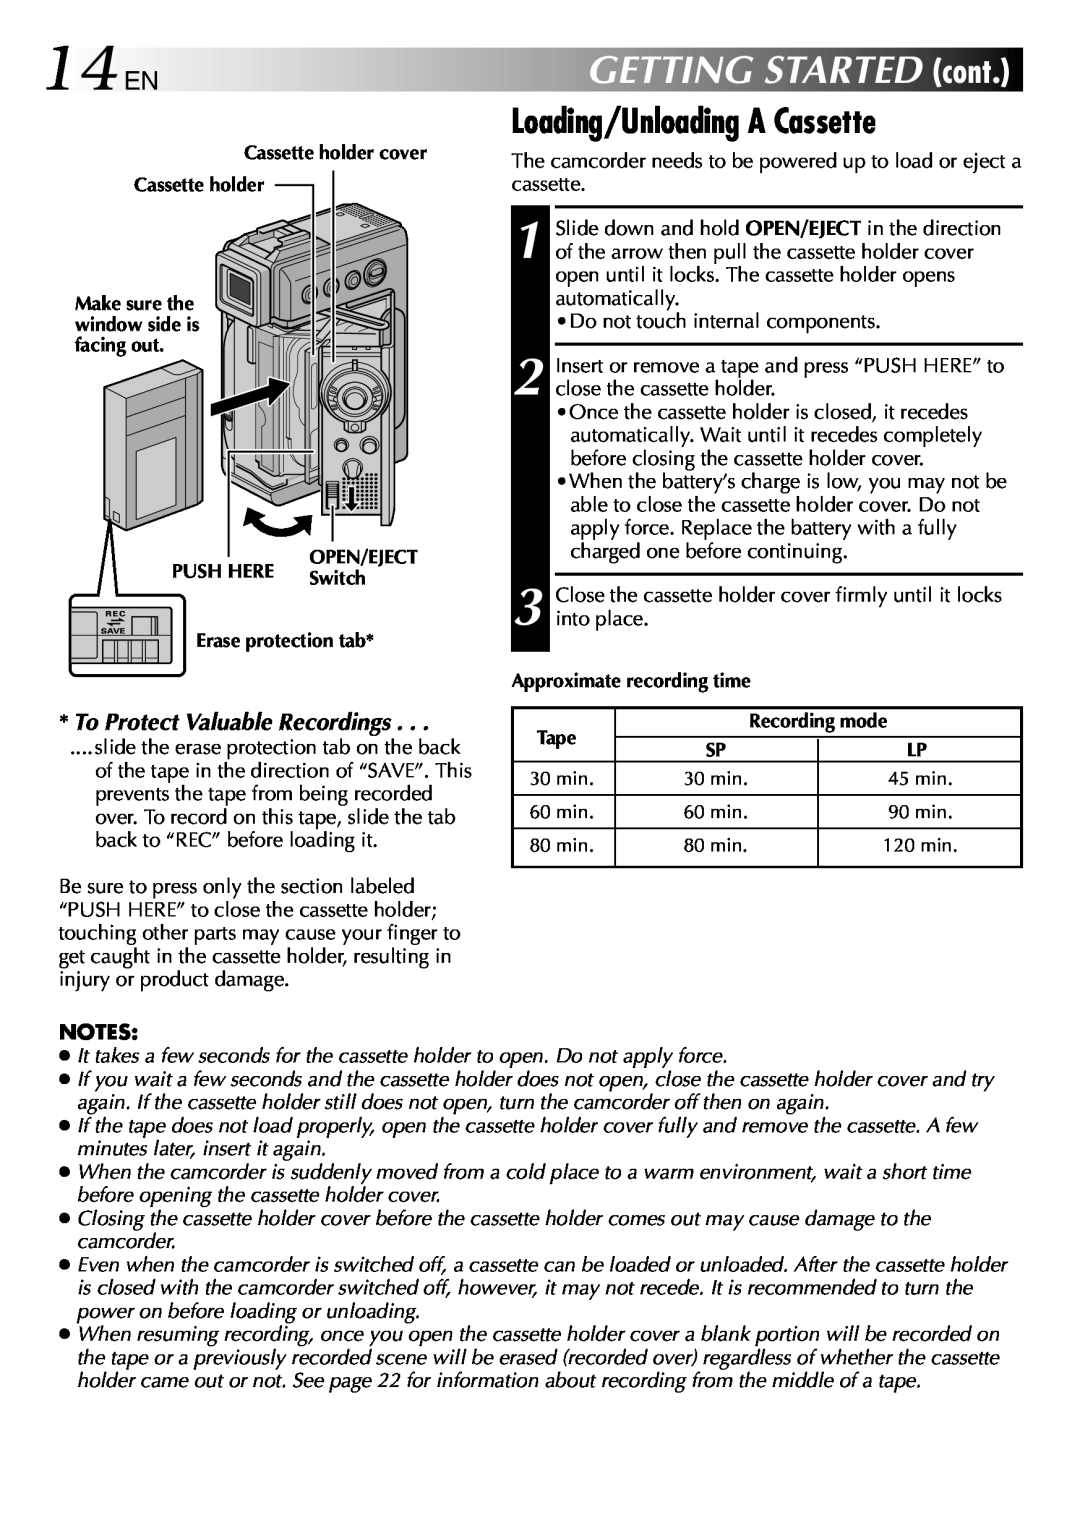 JVC GR-DVP3 specifications 14 EN, GETTING STARTED cont, Loading/Unloading A Cassette, To Protect Valuable Recordings 